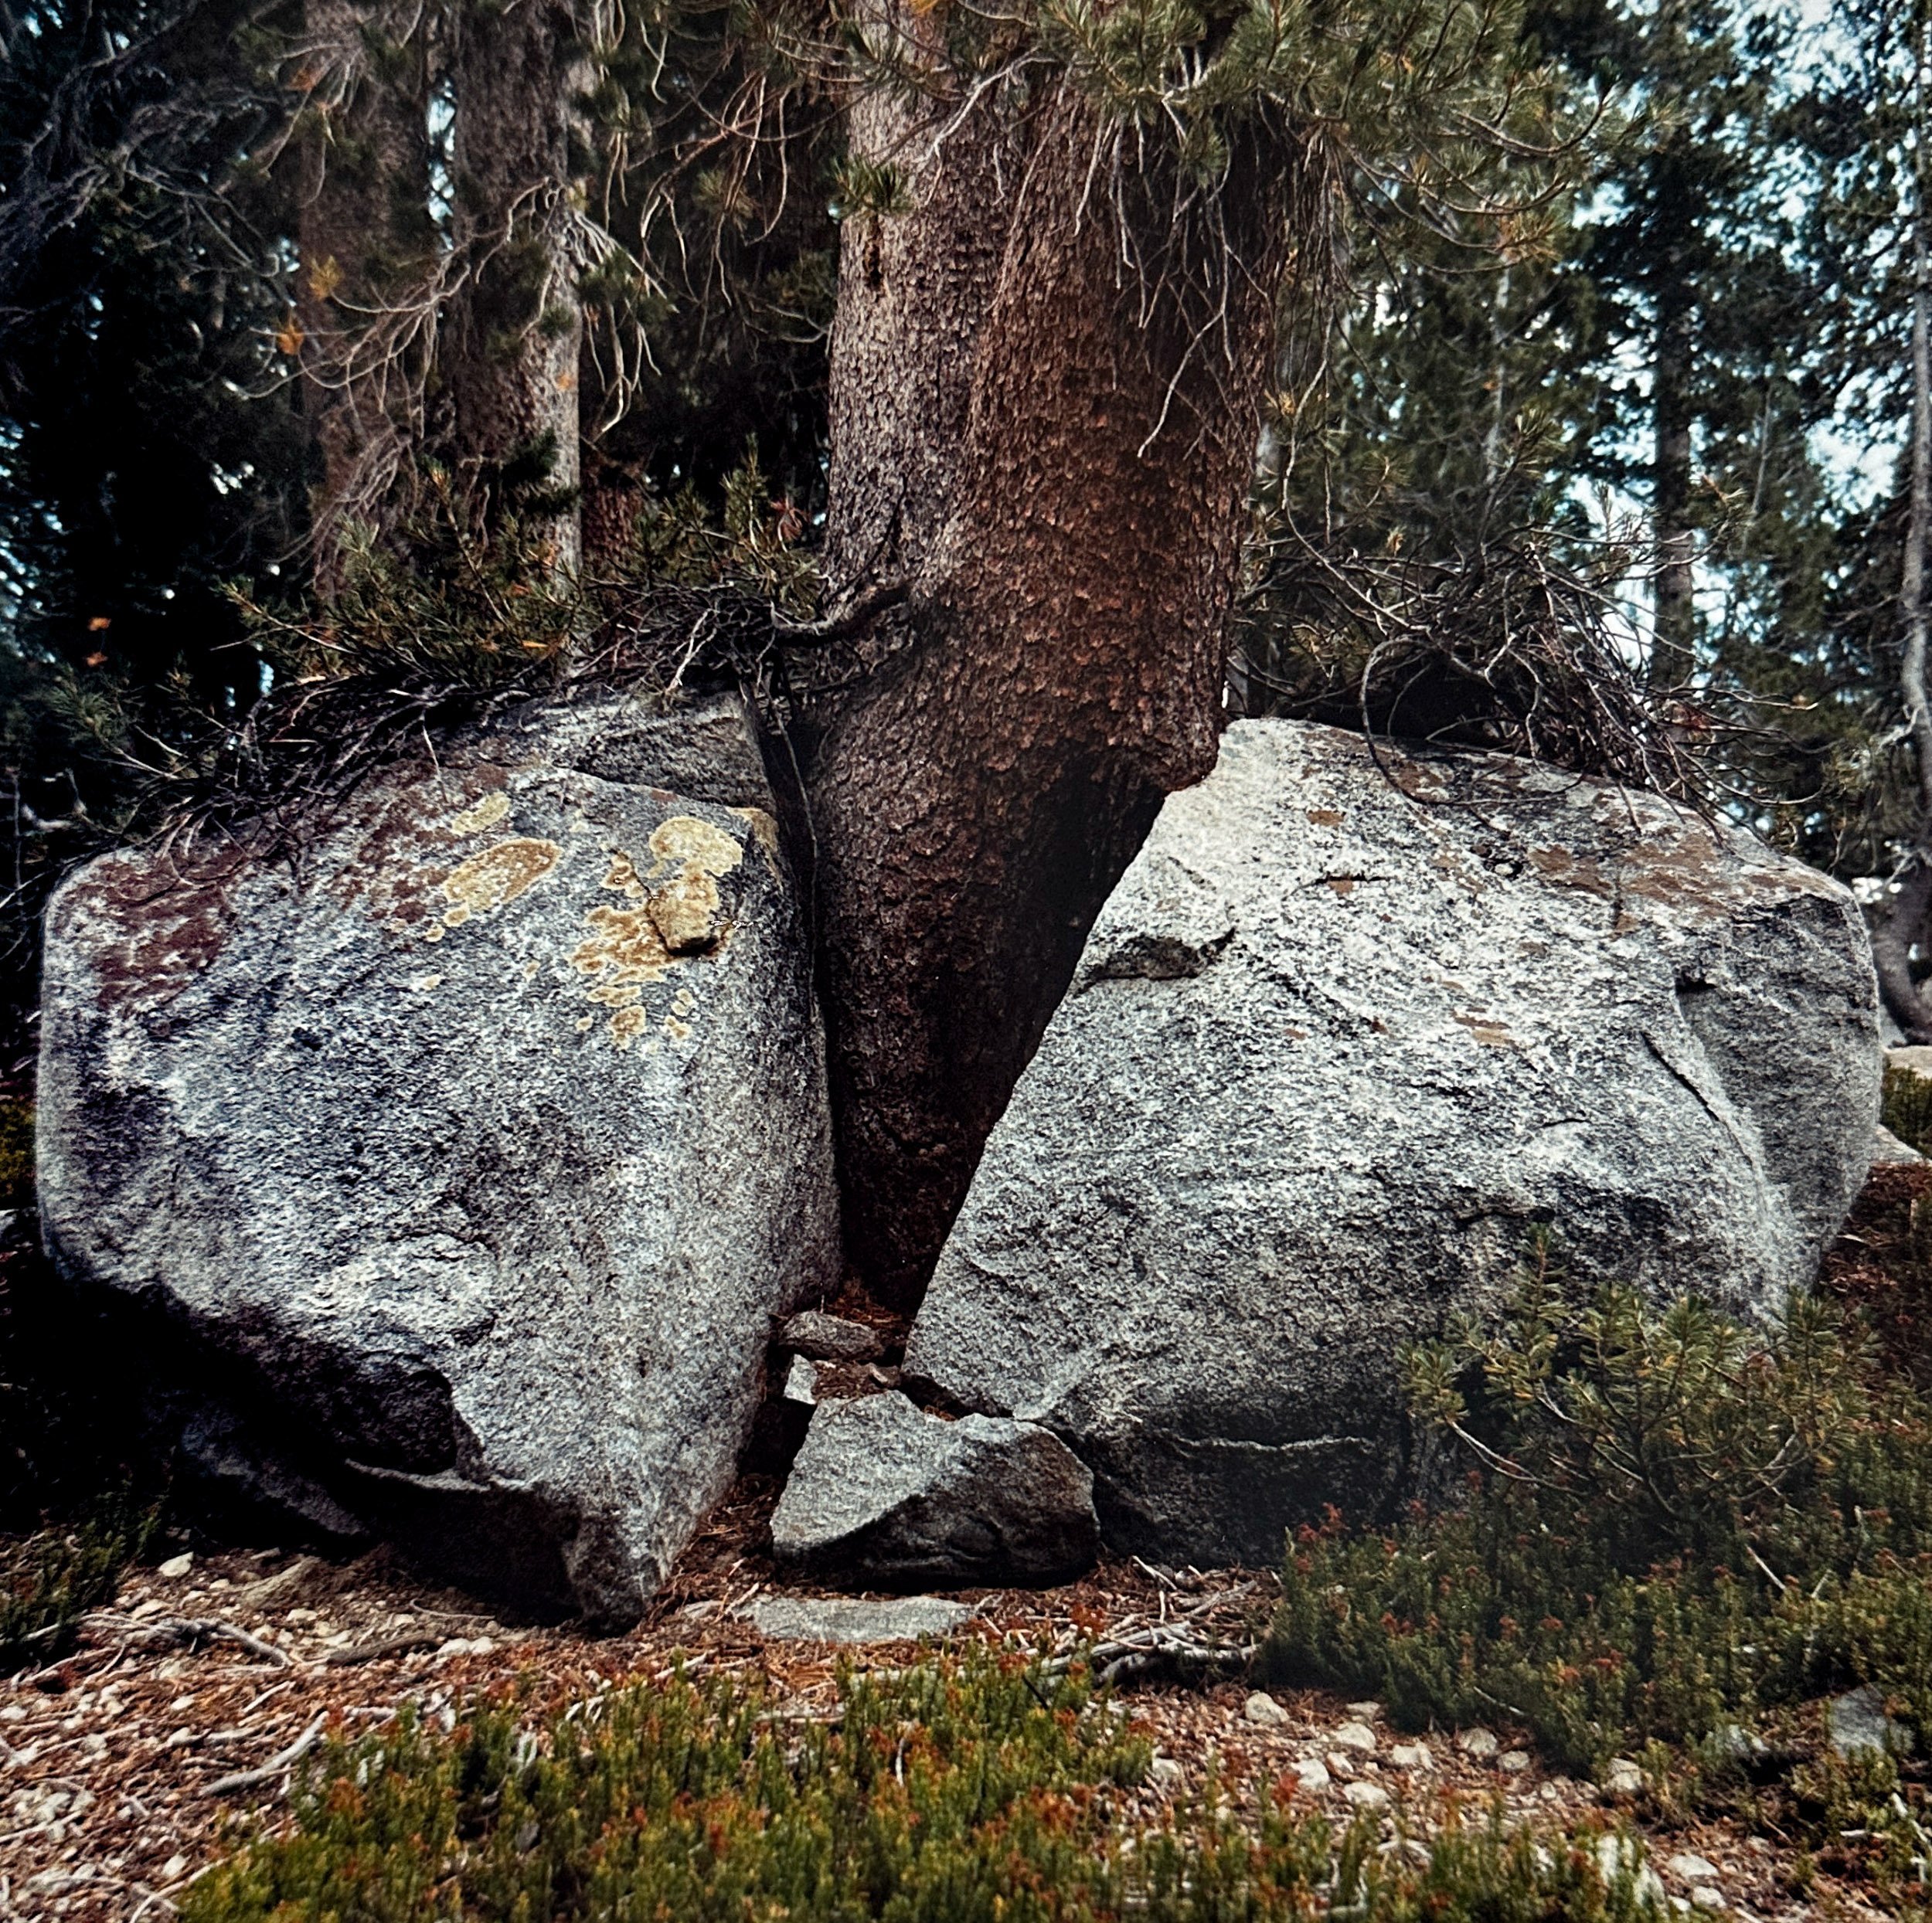   Tree Growing Through Crack in a Rock, Muir Trail Ranch  